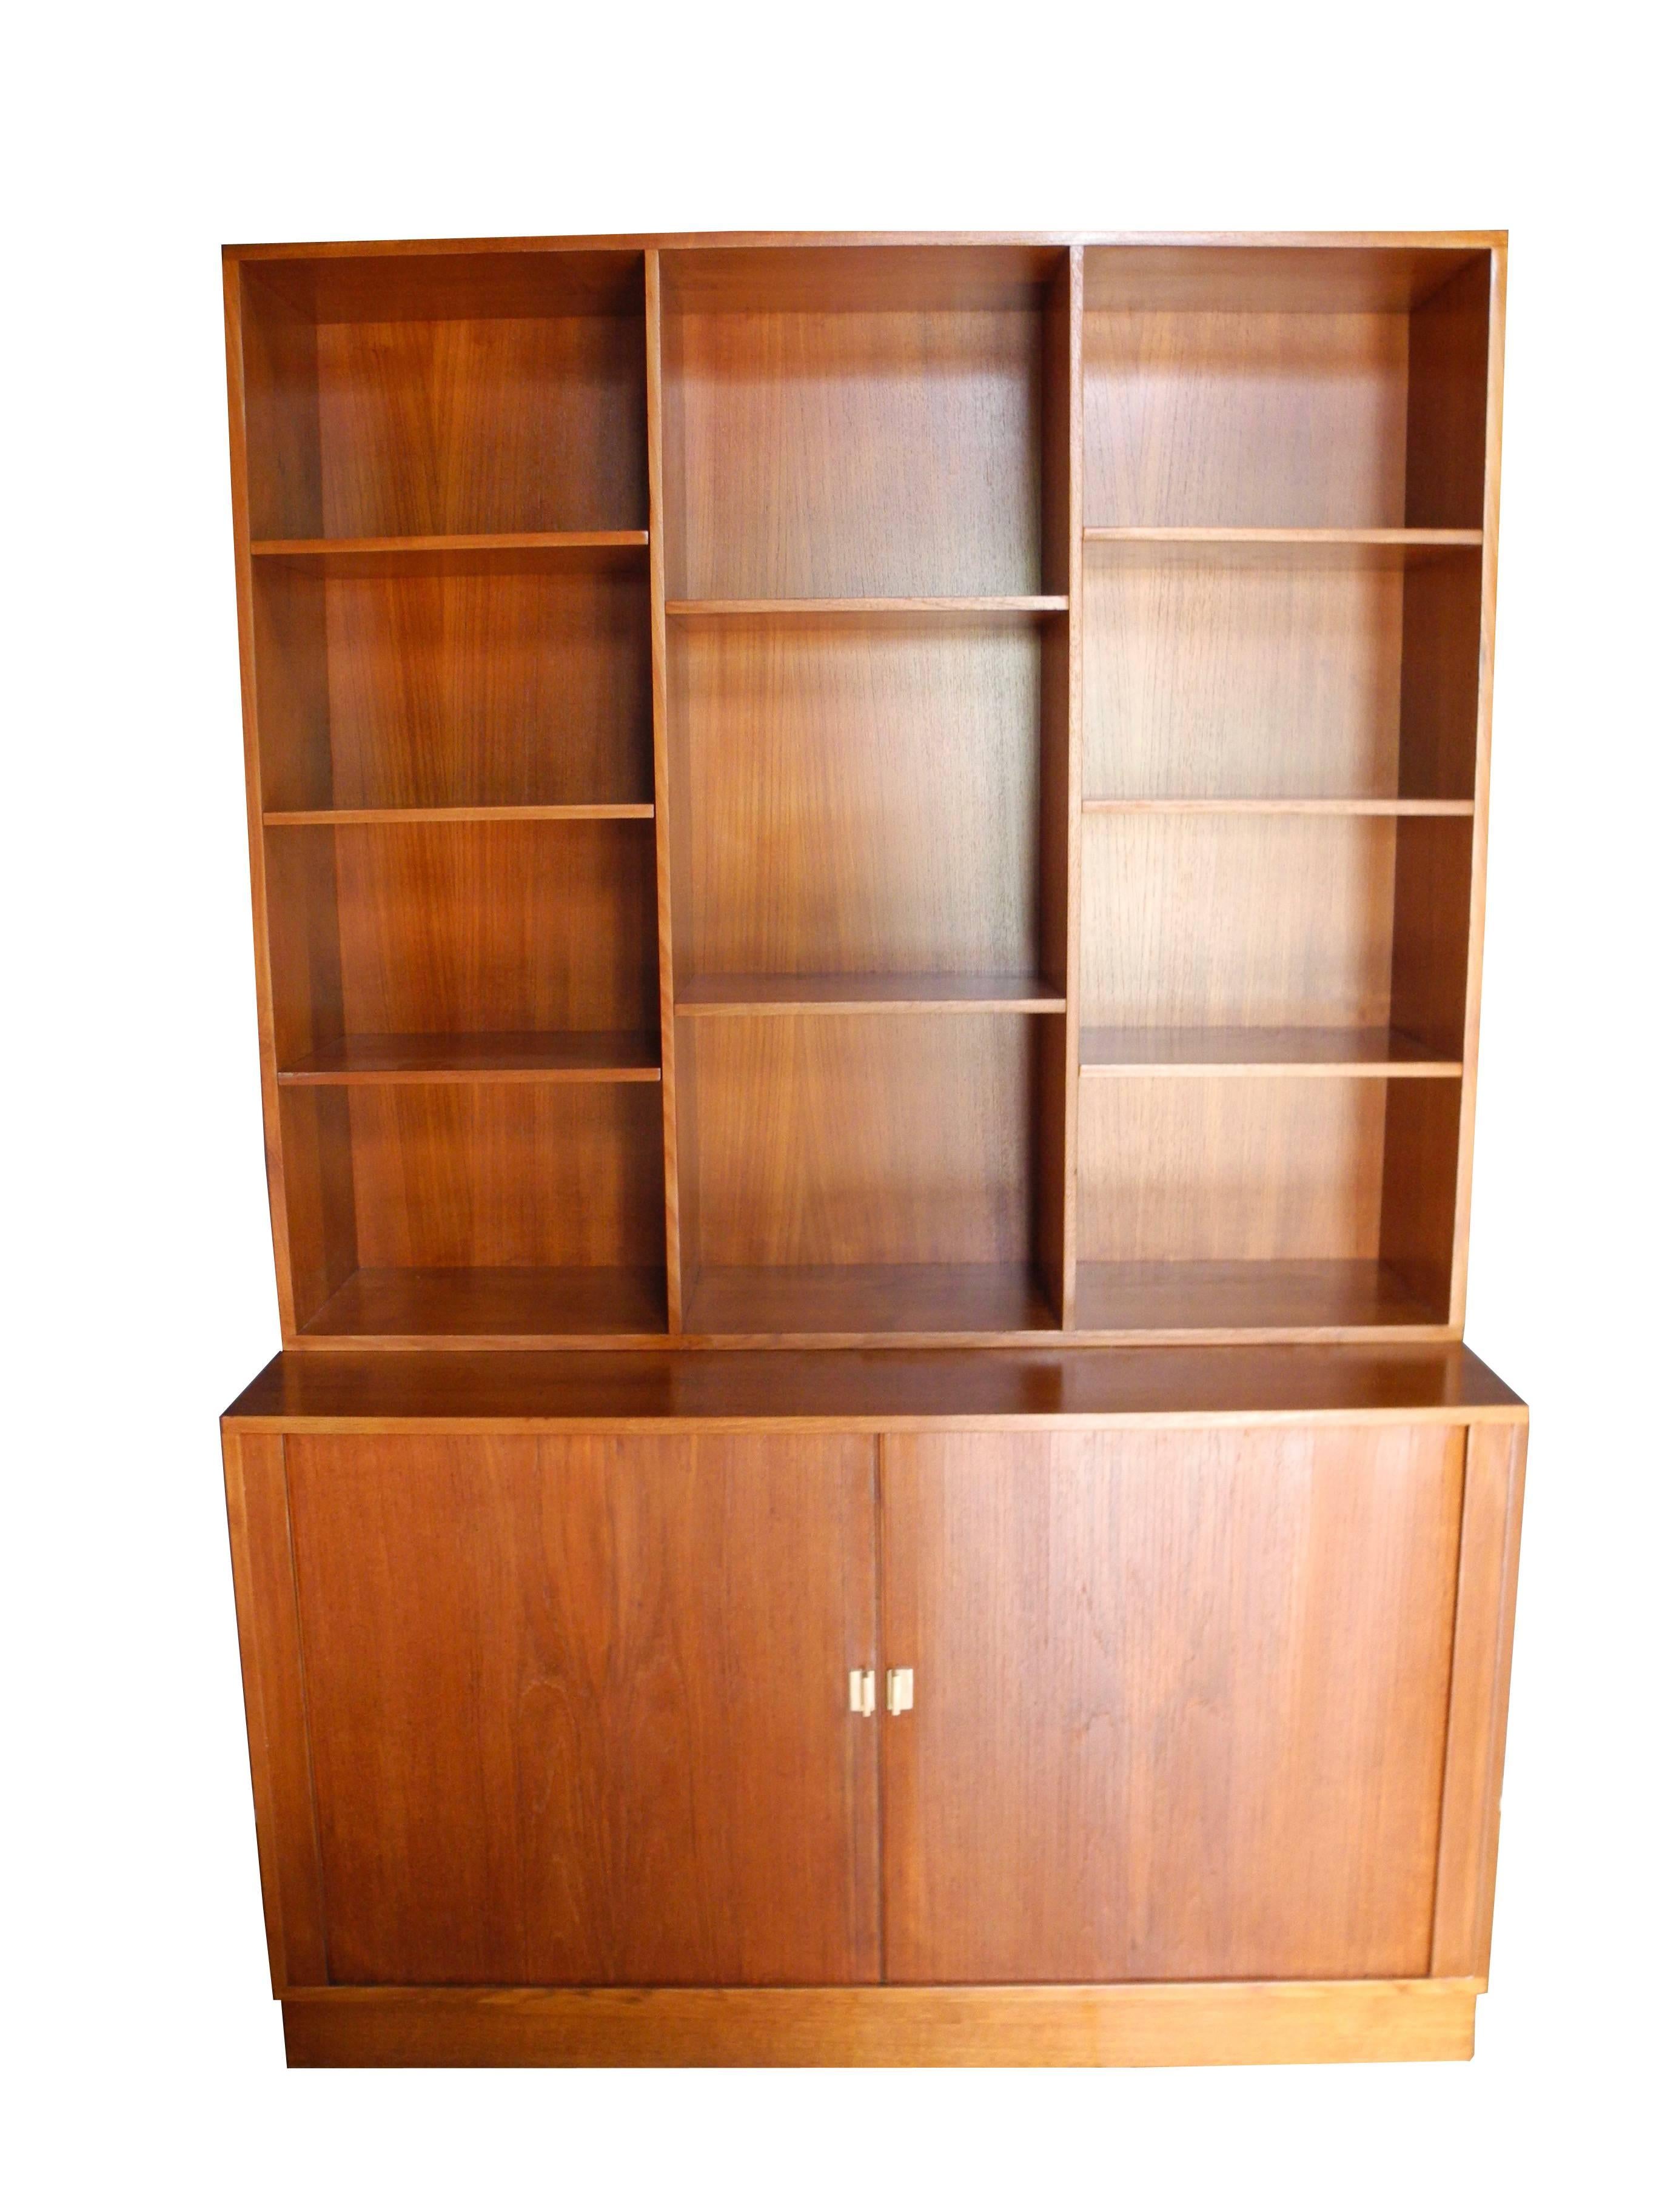 This unique and handsome Danish Modern bookshelf and lower cabinet consists of two tambour doors that wrap around the back of the cabinet when opened. The tambour door pulls are made of solid brass. Up top simply sits a teak bookshelf or display